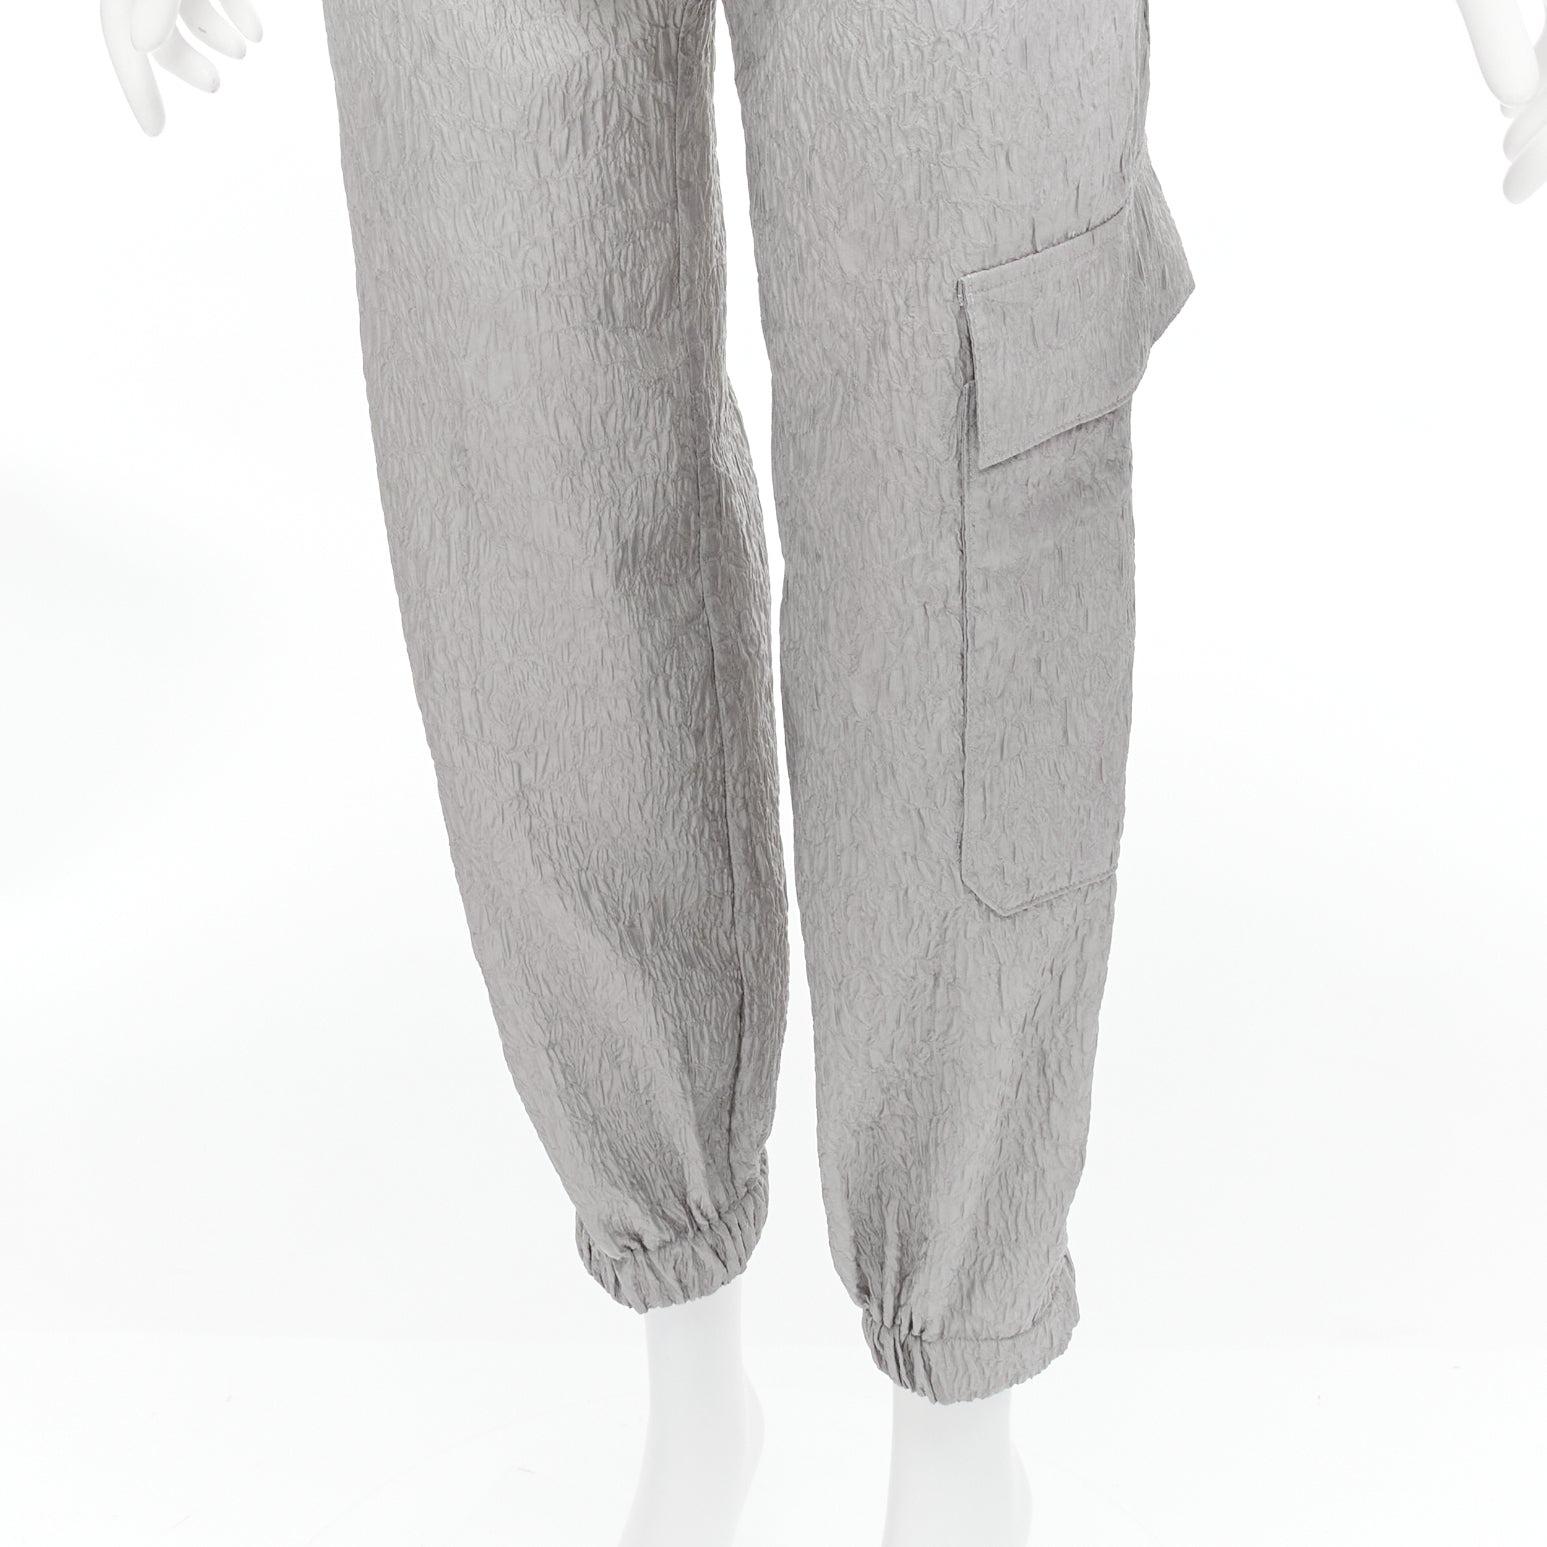 CECILIE BAHNSEN Jackson grey matelasse cloque cargo track pants UK6 XS
Reference: LNKO/A02244
Brand: Cecilie Bahnsen
Model: Jackson
Material: Polyamide, Blend
Color: Grey
Pattern: Solid
Closure: Elasticated
Extra Details: Cecile Bahnsen's Jackson